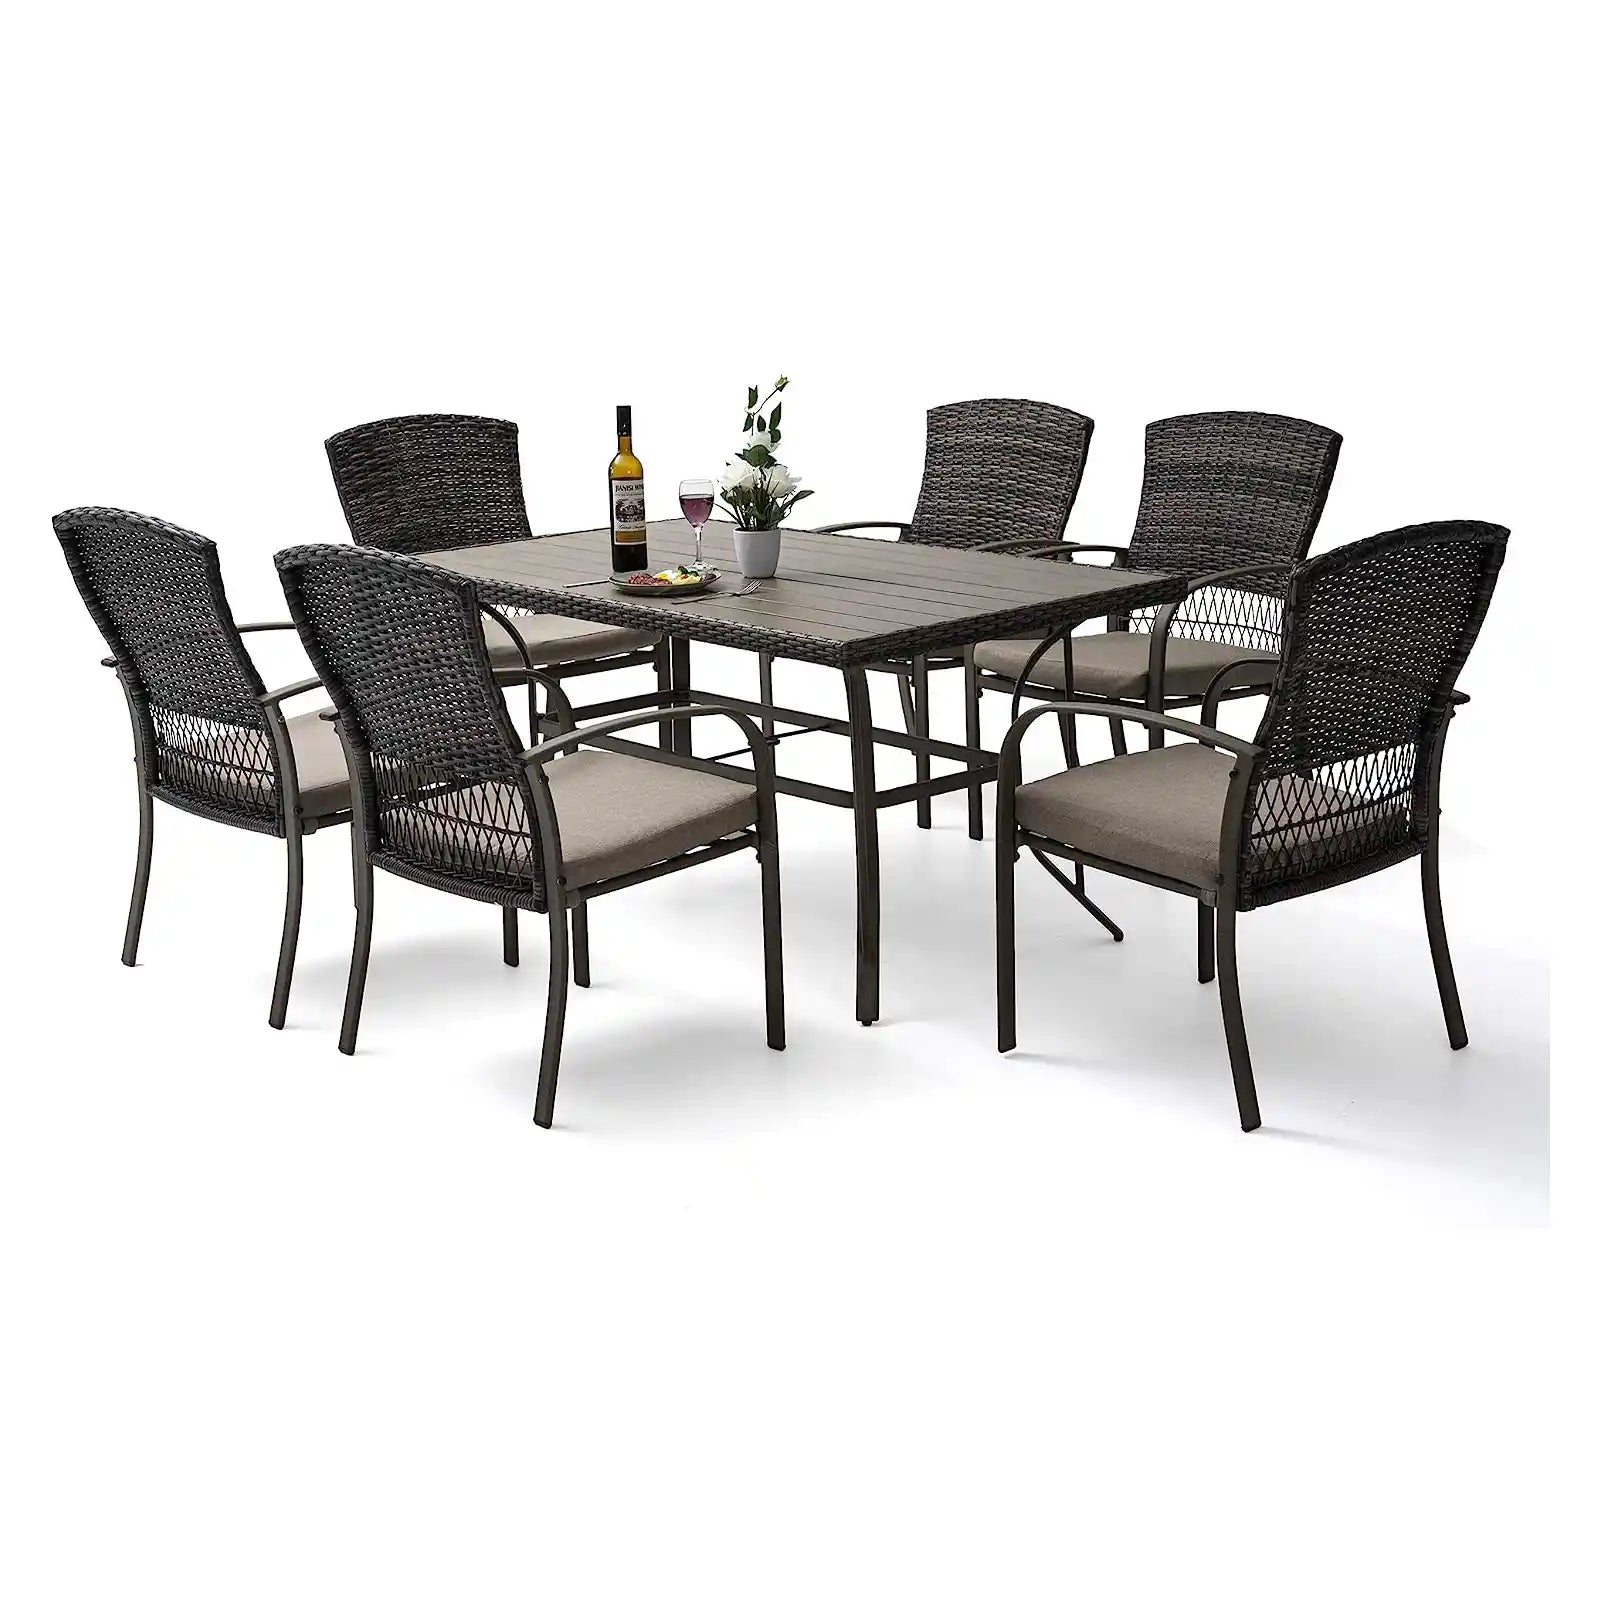 Patio Dining Table Set 5 Piece, Garden Dining Set, Outdoor Wicker Furniture Set with Square Plastic-Wood Table Top and Washable Cushions for Patio Garden Poolside